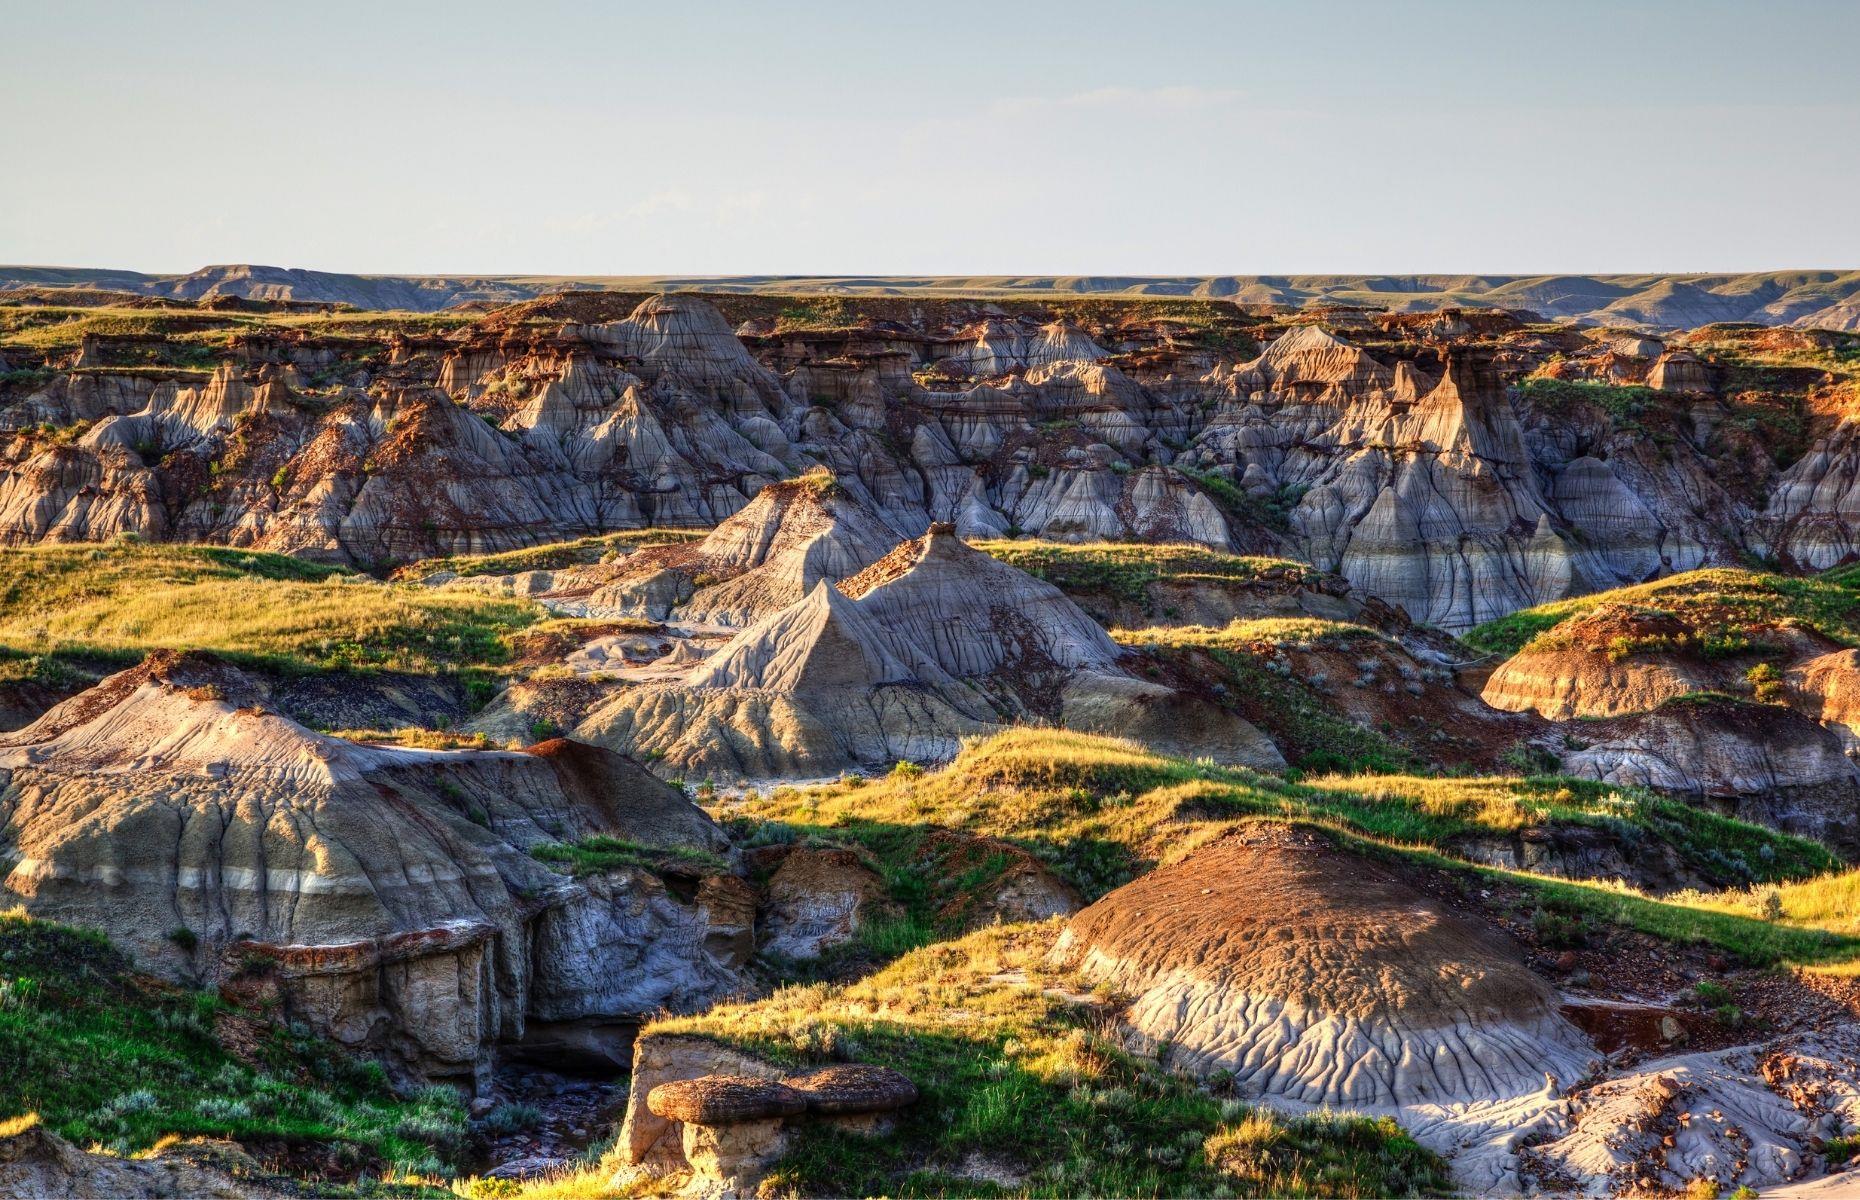 <p>Nicknamed the Dinosaur Capital of the World, <a href="https://traveldrumheller.com/">Drumheller</a> has much to offer. Located in Alberta, Canada, the town is surrounded by the breathtaking Badlands, which appear plucked from a pre-historic landscape. In 2011, a 110 million-year-old nodosaur fossil was discovered here. Weighing close to 15,000 lbs (7,000kg), it took paleontologists six years to extract the skeleton, which is now on display in Drumheller’s Royal Tyrrell Museum, Canada’s only dedicated paleontology institution.</p>